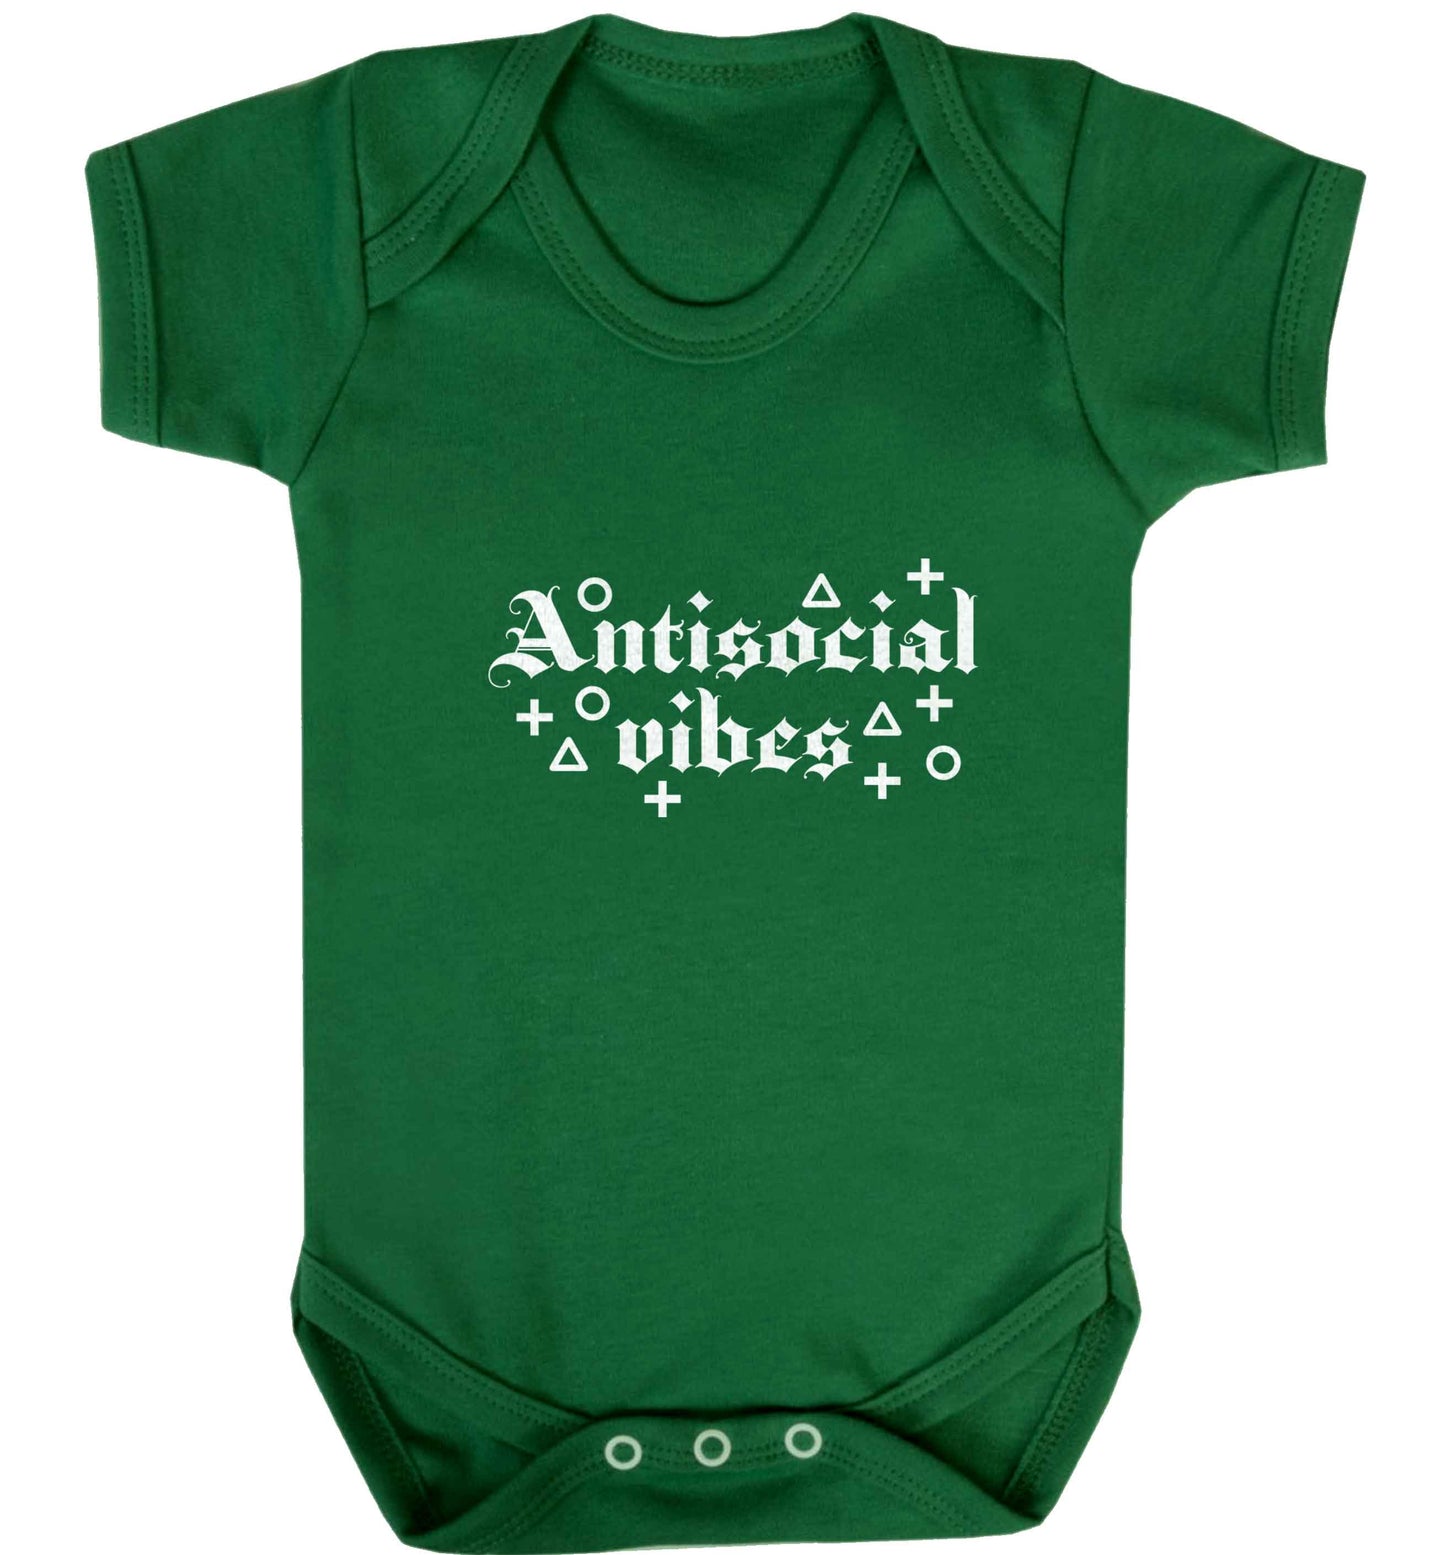 Antisocial vibes baby vest green 18-24 months